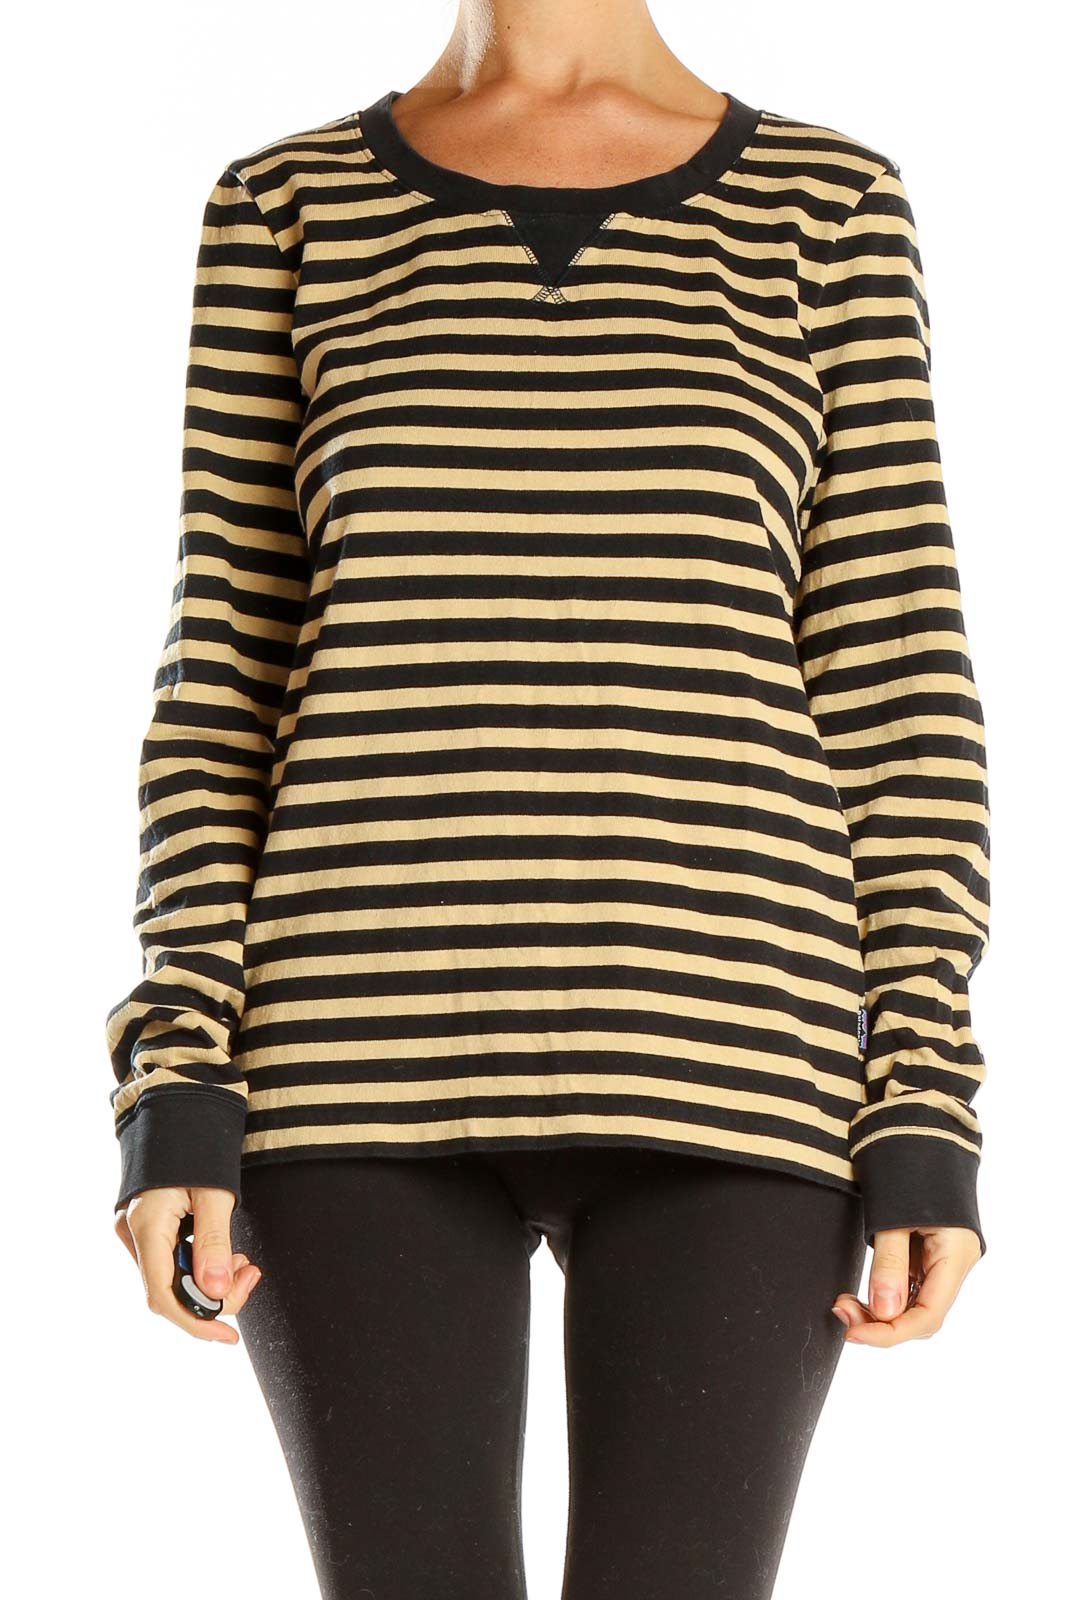 Beige Black Striped Casual Long Sleeve Top Front